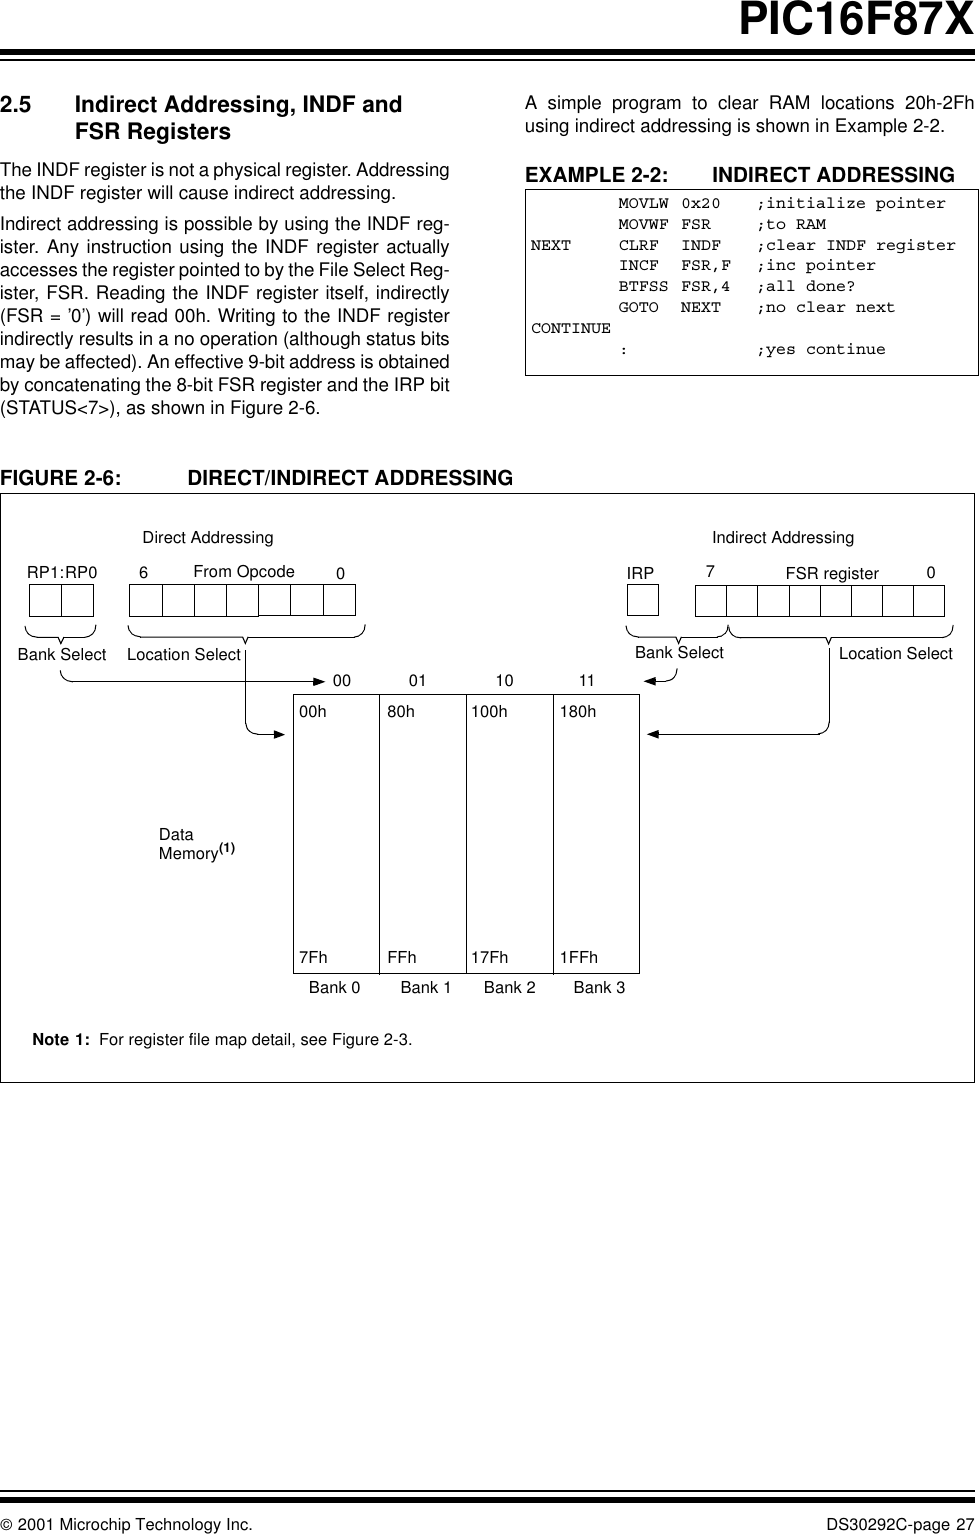  2001 Microchip Technology Inc. DS30292C-page 27PIC16F87X2.5 Indirect Addressing, INDF and FSR RegistersThe INDF register is not a physical register. Addressingthe INDF register will cause indirect addressing. Indirect addressing is possible by using the INDF reg-ister. Any instruction using the INDF register actuallyaccesses the register pointed to by the File Select Reg-ister, FSR. Reading the INDF register itself, indirectly(FSR = ’0’) will read 00h. Writing to the INDF registerindirectly results in a no operation (although status bitsmay be affected). An effective 9-bit address is obtainedby concatenating the 8-bit FSR register and the IRP bit(STATUS&lt;7&gt;), as shown in Figure 2-6.A simple program to clear RAM locations 20h-2Fhusing indirect addressing is shown in Example 2-2.EXAMPLE 2-2: INDIRECT ADDRESSINGFIGURE 2-6: DIRECT/INDIRECT ADDRESSINGMOVLW 0x20 ;initialize pointerMOVWF FSR ;to RAMNEXT CLRF INDF ;clear INDF registerINCF FSR,F ;inc pointerBTFSS FSR,4 ;all done? GOTO NEXT ;no clear nextCONTINUE: ;yes continueNote 1: For register file map detail, see Figure 2-3.DataMemory(1)Indirect AddressingDirect AddressingBank Select Location SelectRP1:RP0 6 0From Opcode IRP FSR register70Bank Select Location Select00 01 10 11Bank 0 Bank 1 Bank 2 Bank 3FFh80h7Fh00h17Fh100h1FFh180h